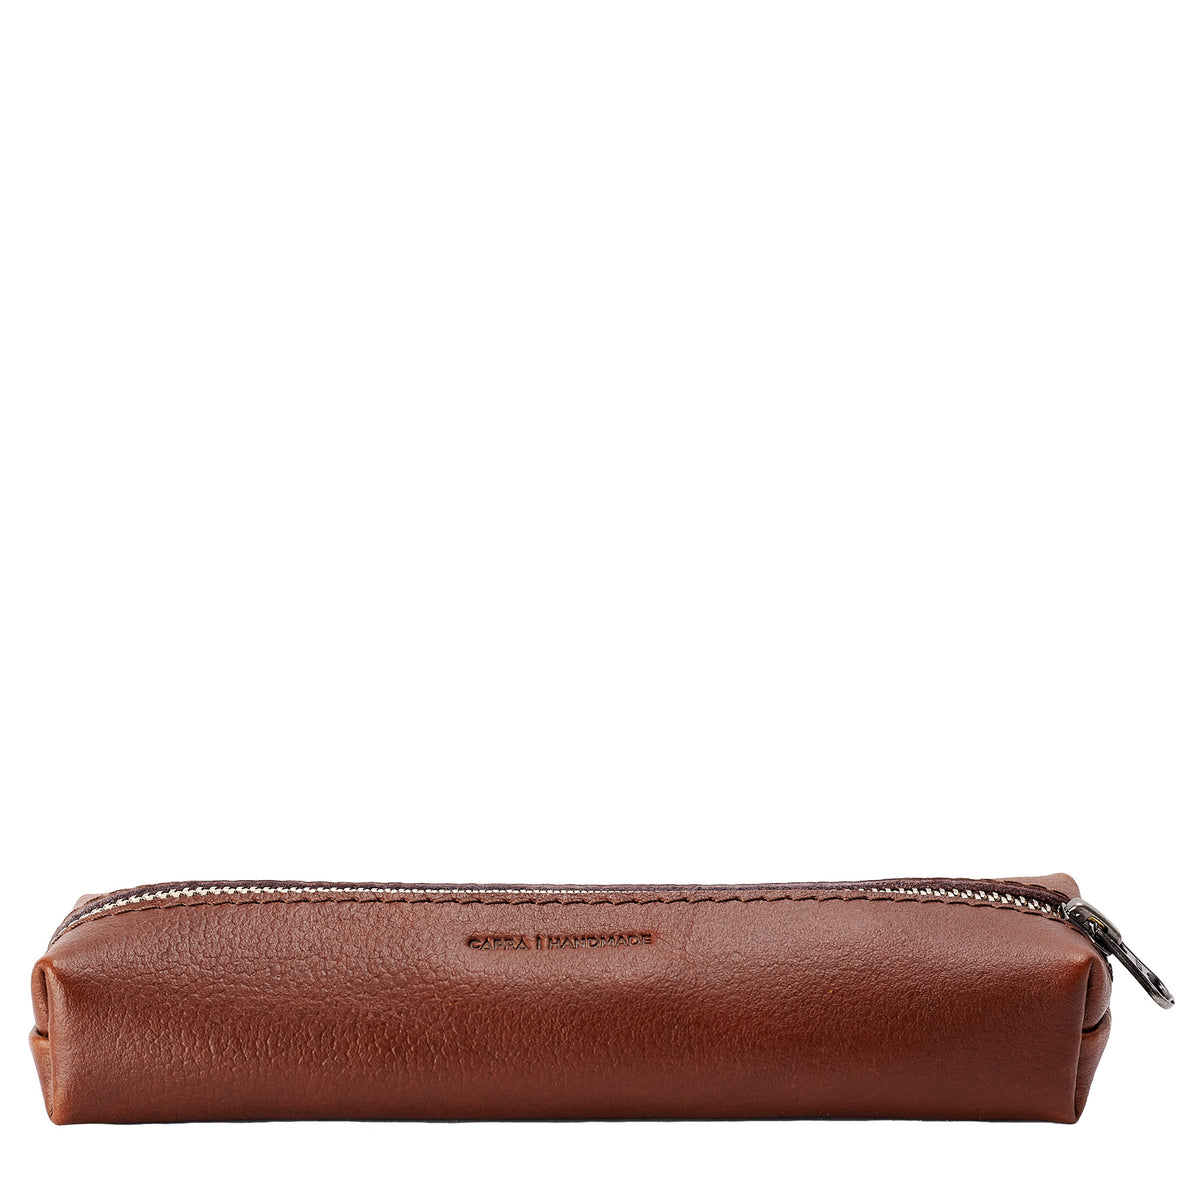 Handmade Brown Pencil Case by Capra Leather